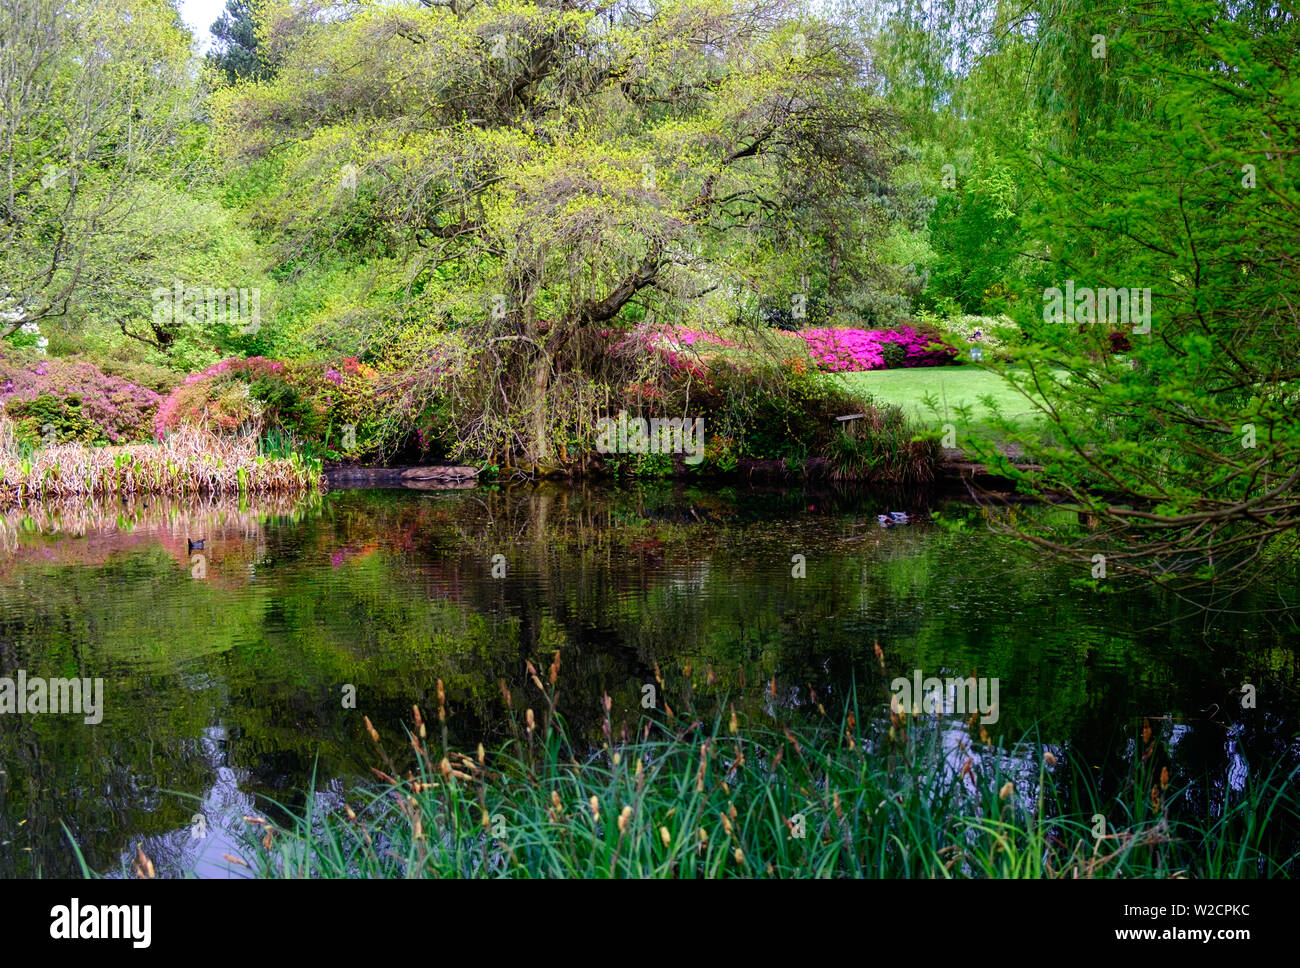 Woodland pond surrounded by green foliage, trees, grasses and flower shrubs in the Spring at Isabella Plantation in Richmond Park, London, England. Stock Photo